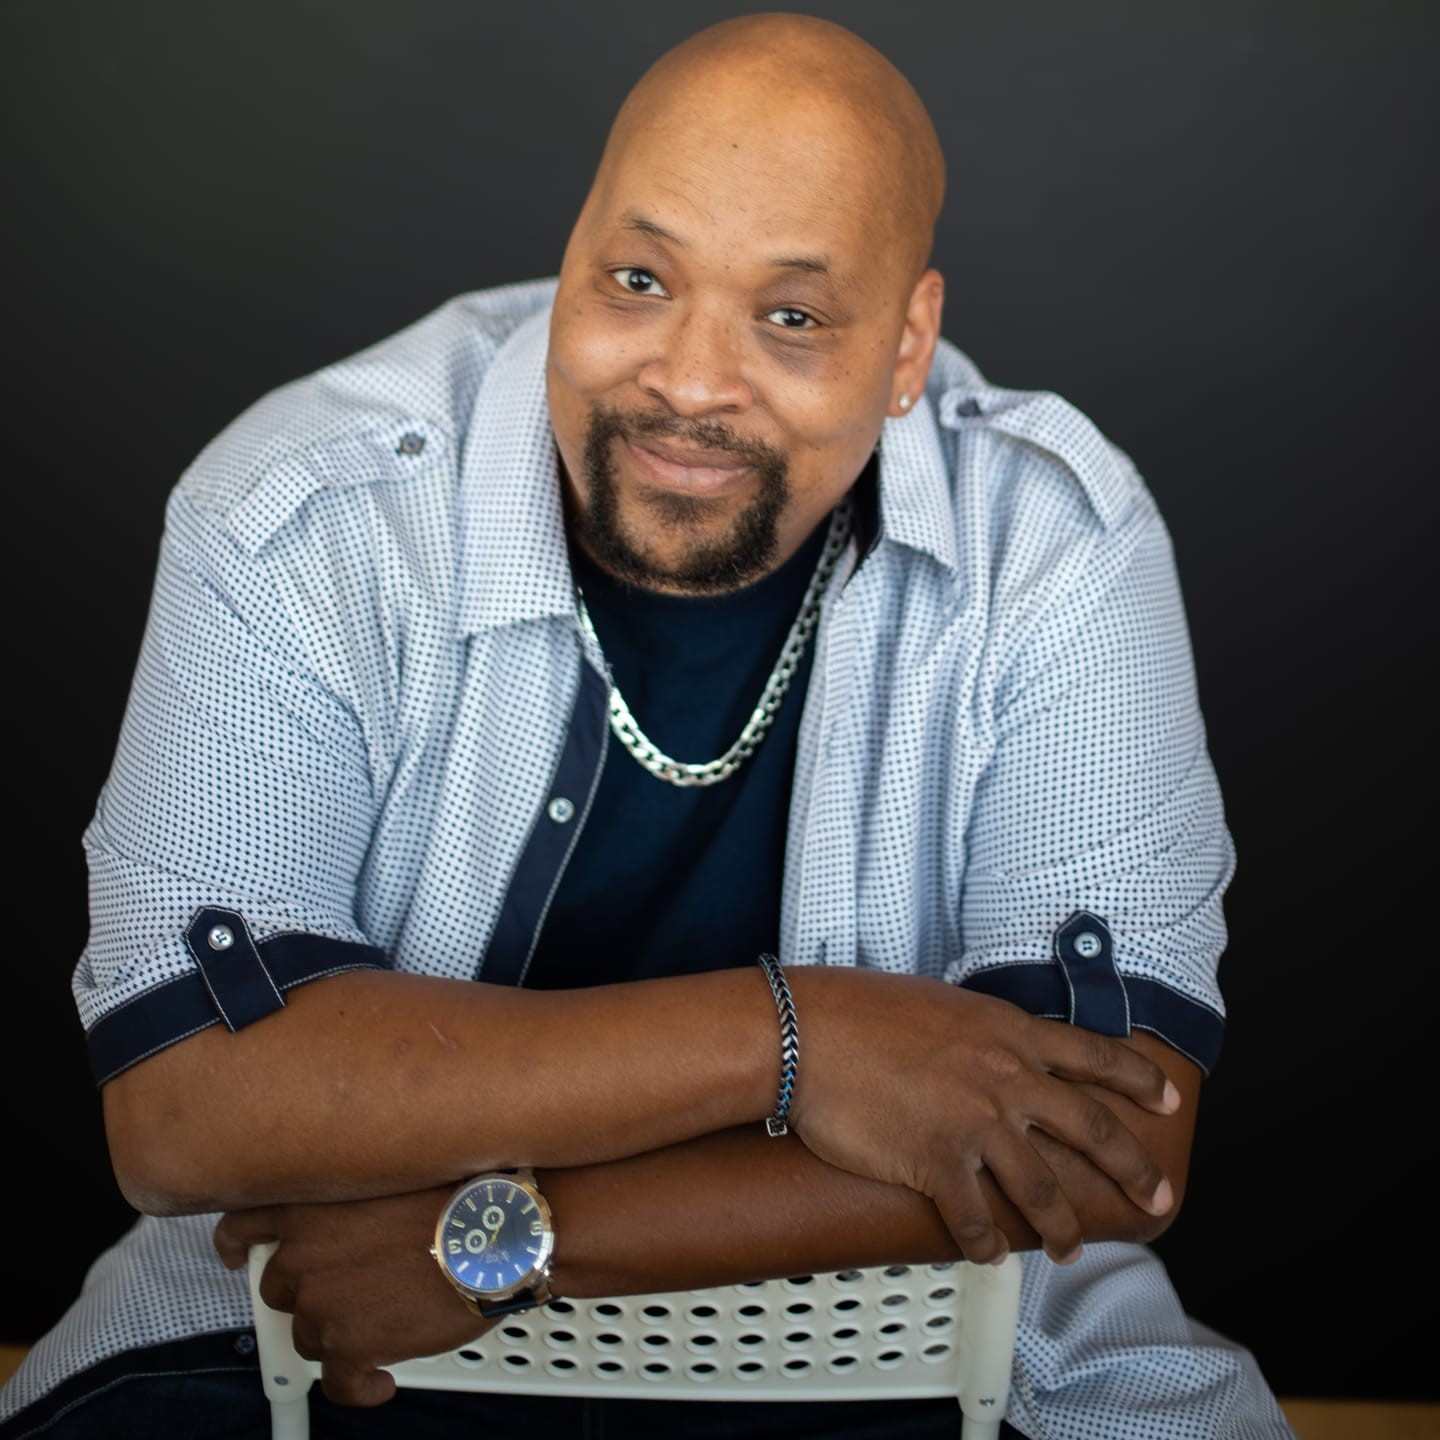 Milton Wyley - Sat. 7:30 Show Funny Stop Comedy Club on Jun 22, 19:30@Funny Stop Comedy Club - Buy tickets and Get information on Funny Stop funnystop.online